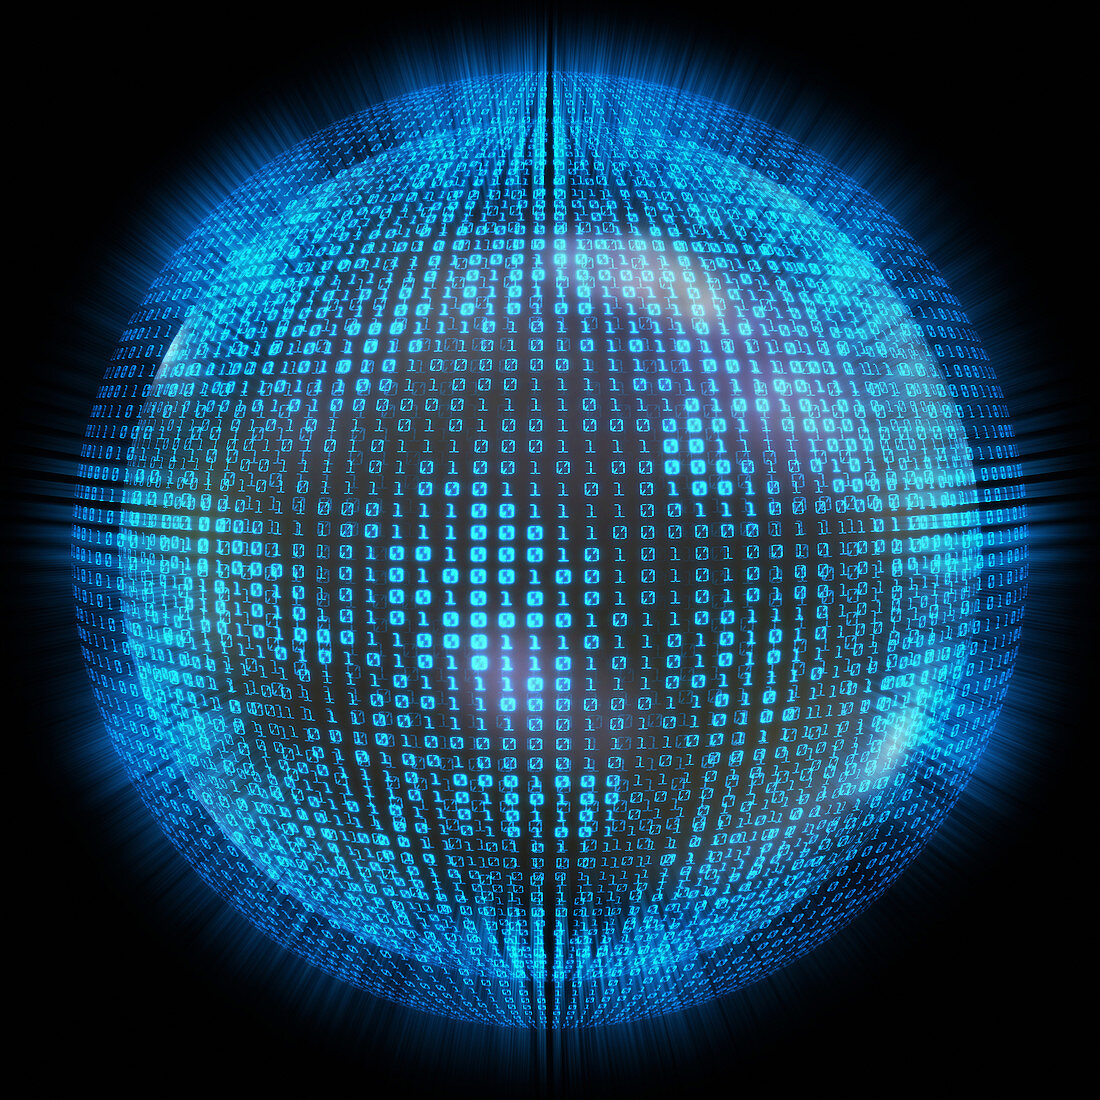 Binary code on a sphere,illustration